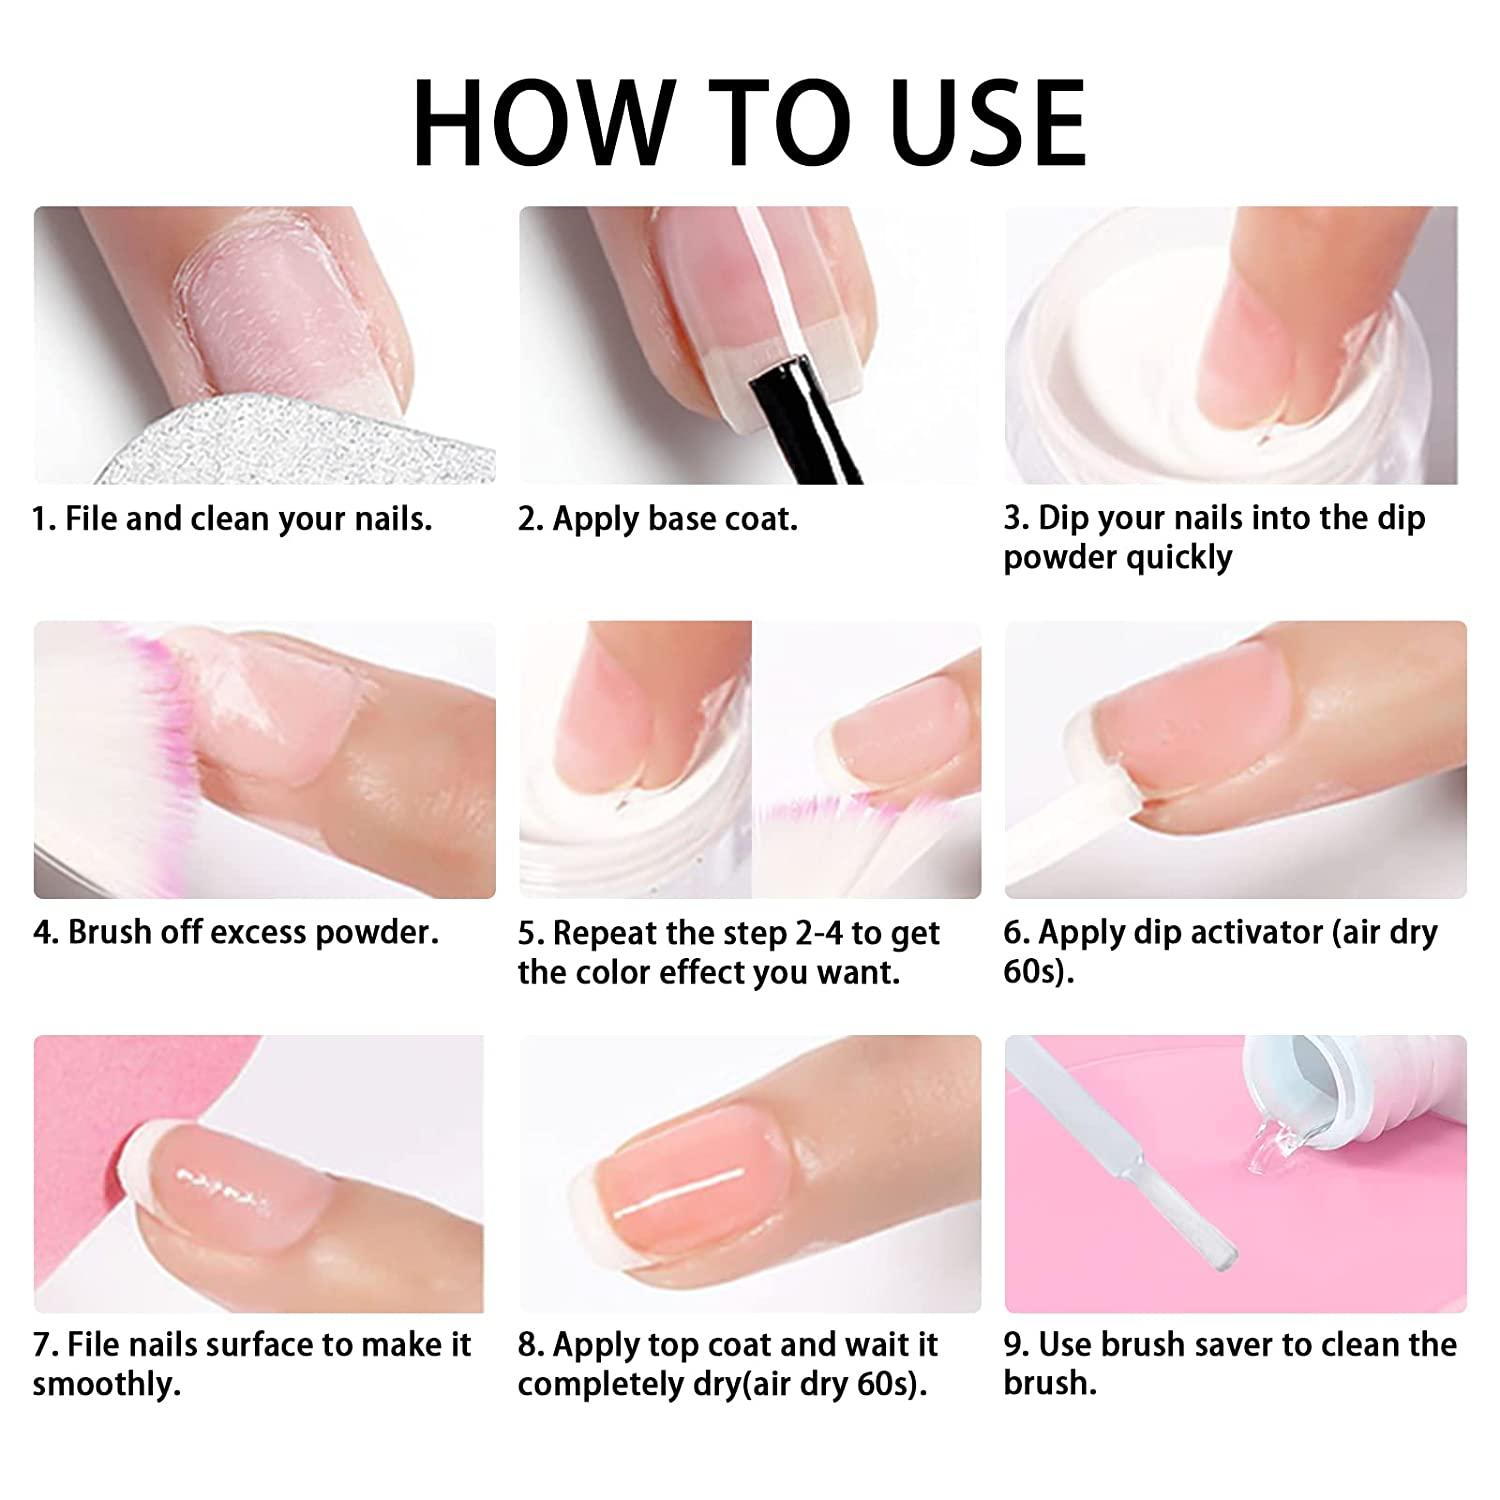 How to Do Dip Powder Nails at Home : 6 Steps (with Pictures